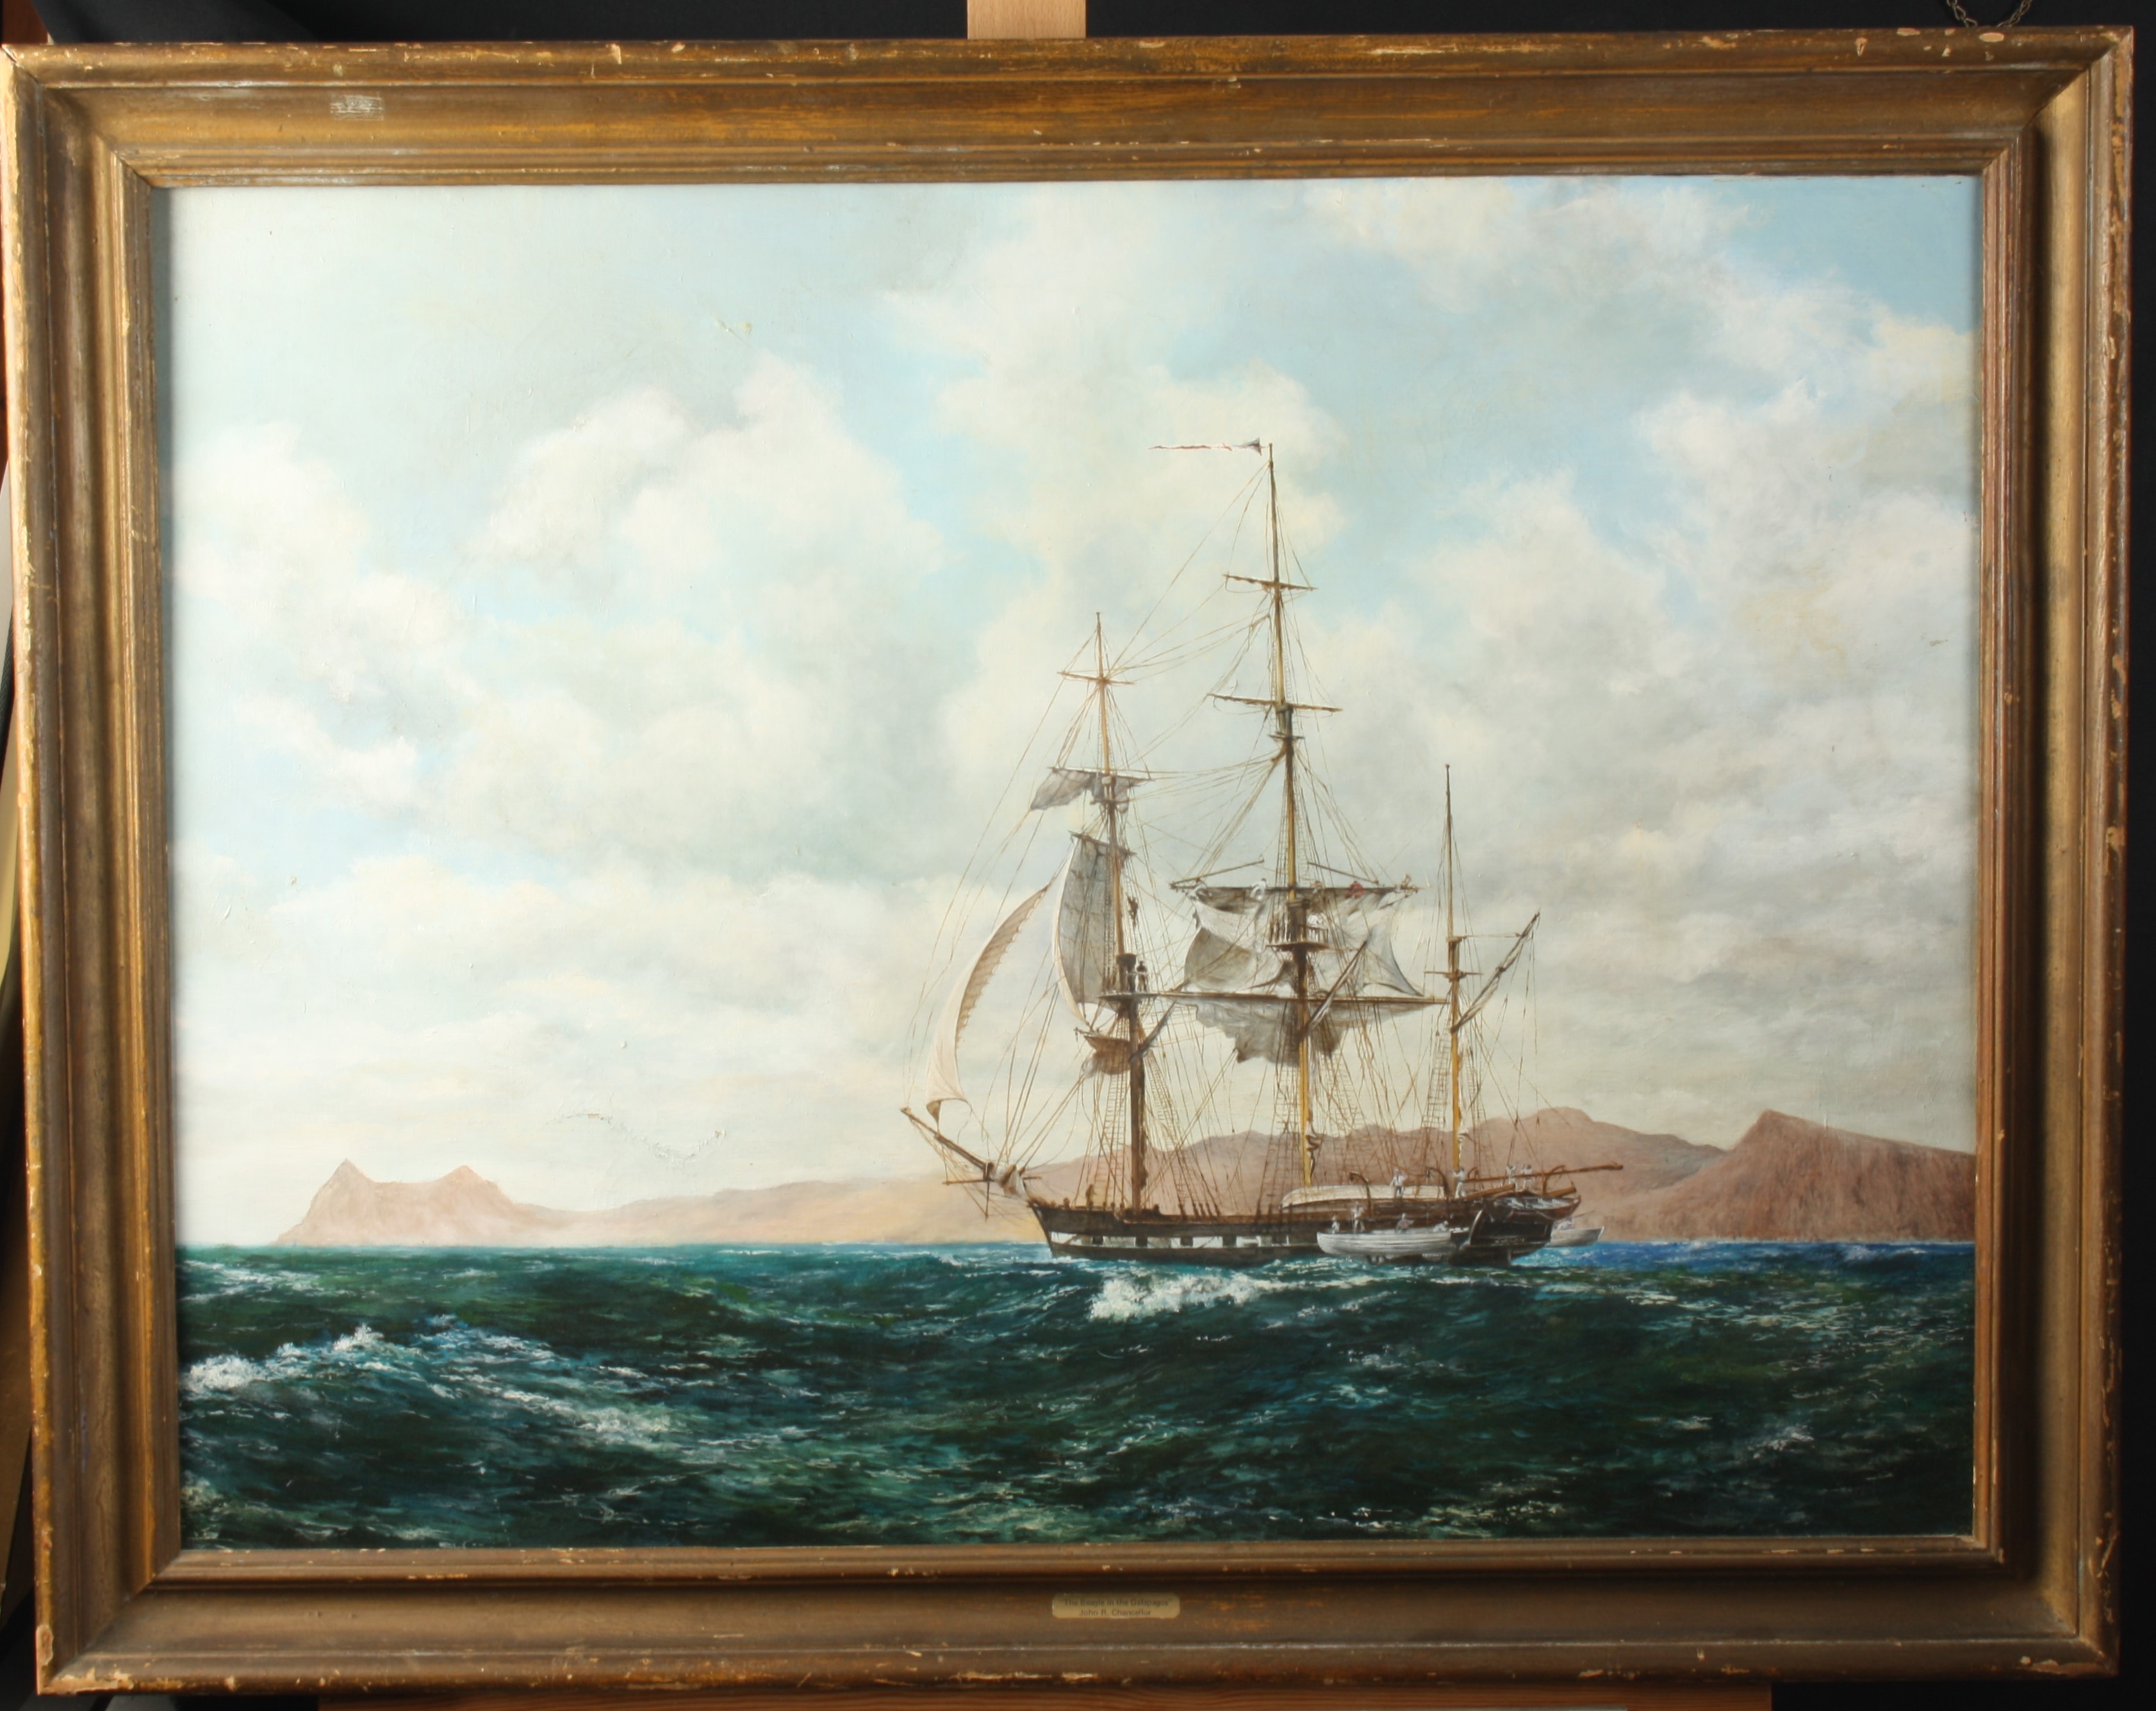 Follower of JOHN RUSSELL CHANCELLOR The Beagle in The Galapagos Oil on canvas 60 x 80cm - Image 2 of 2